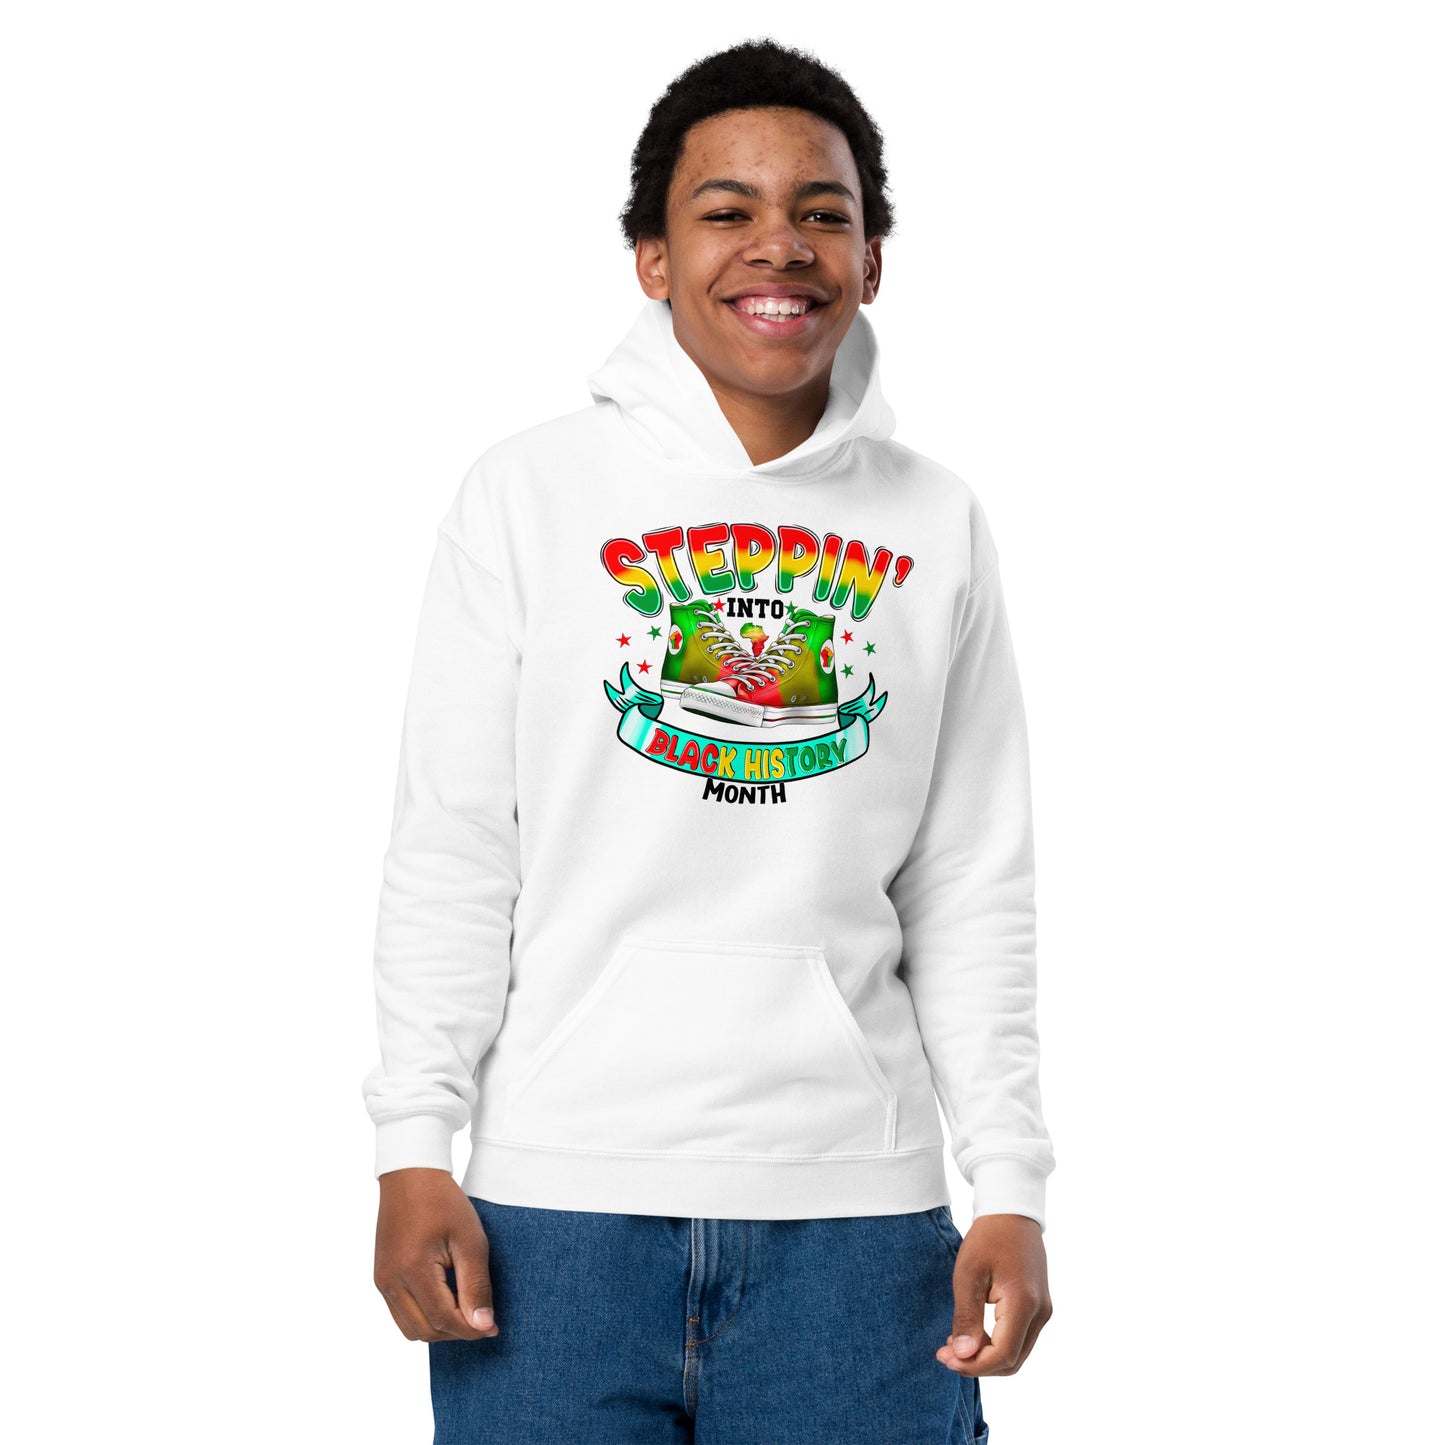 Youth heavy blend hoodie - Steppin Into Black History Month